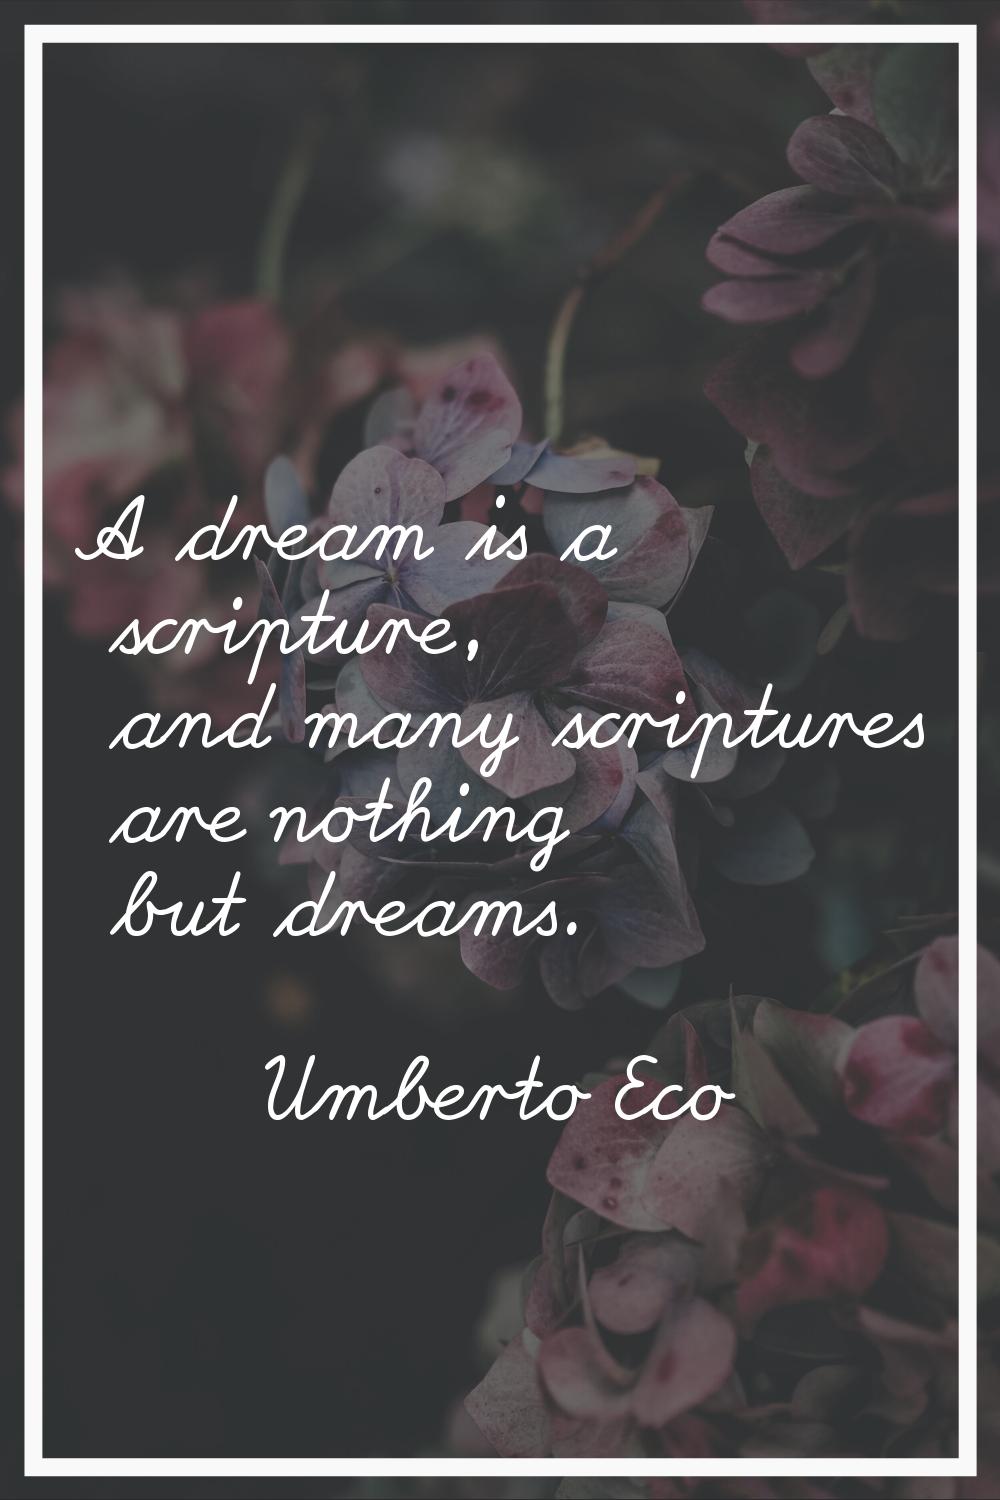 A dream is a scripture, and many scriptures are nothing but dreams.